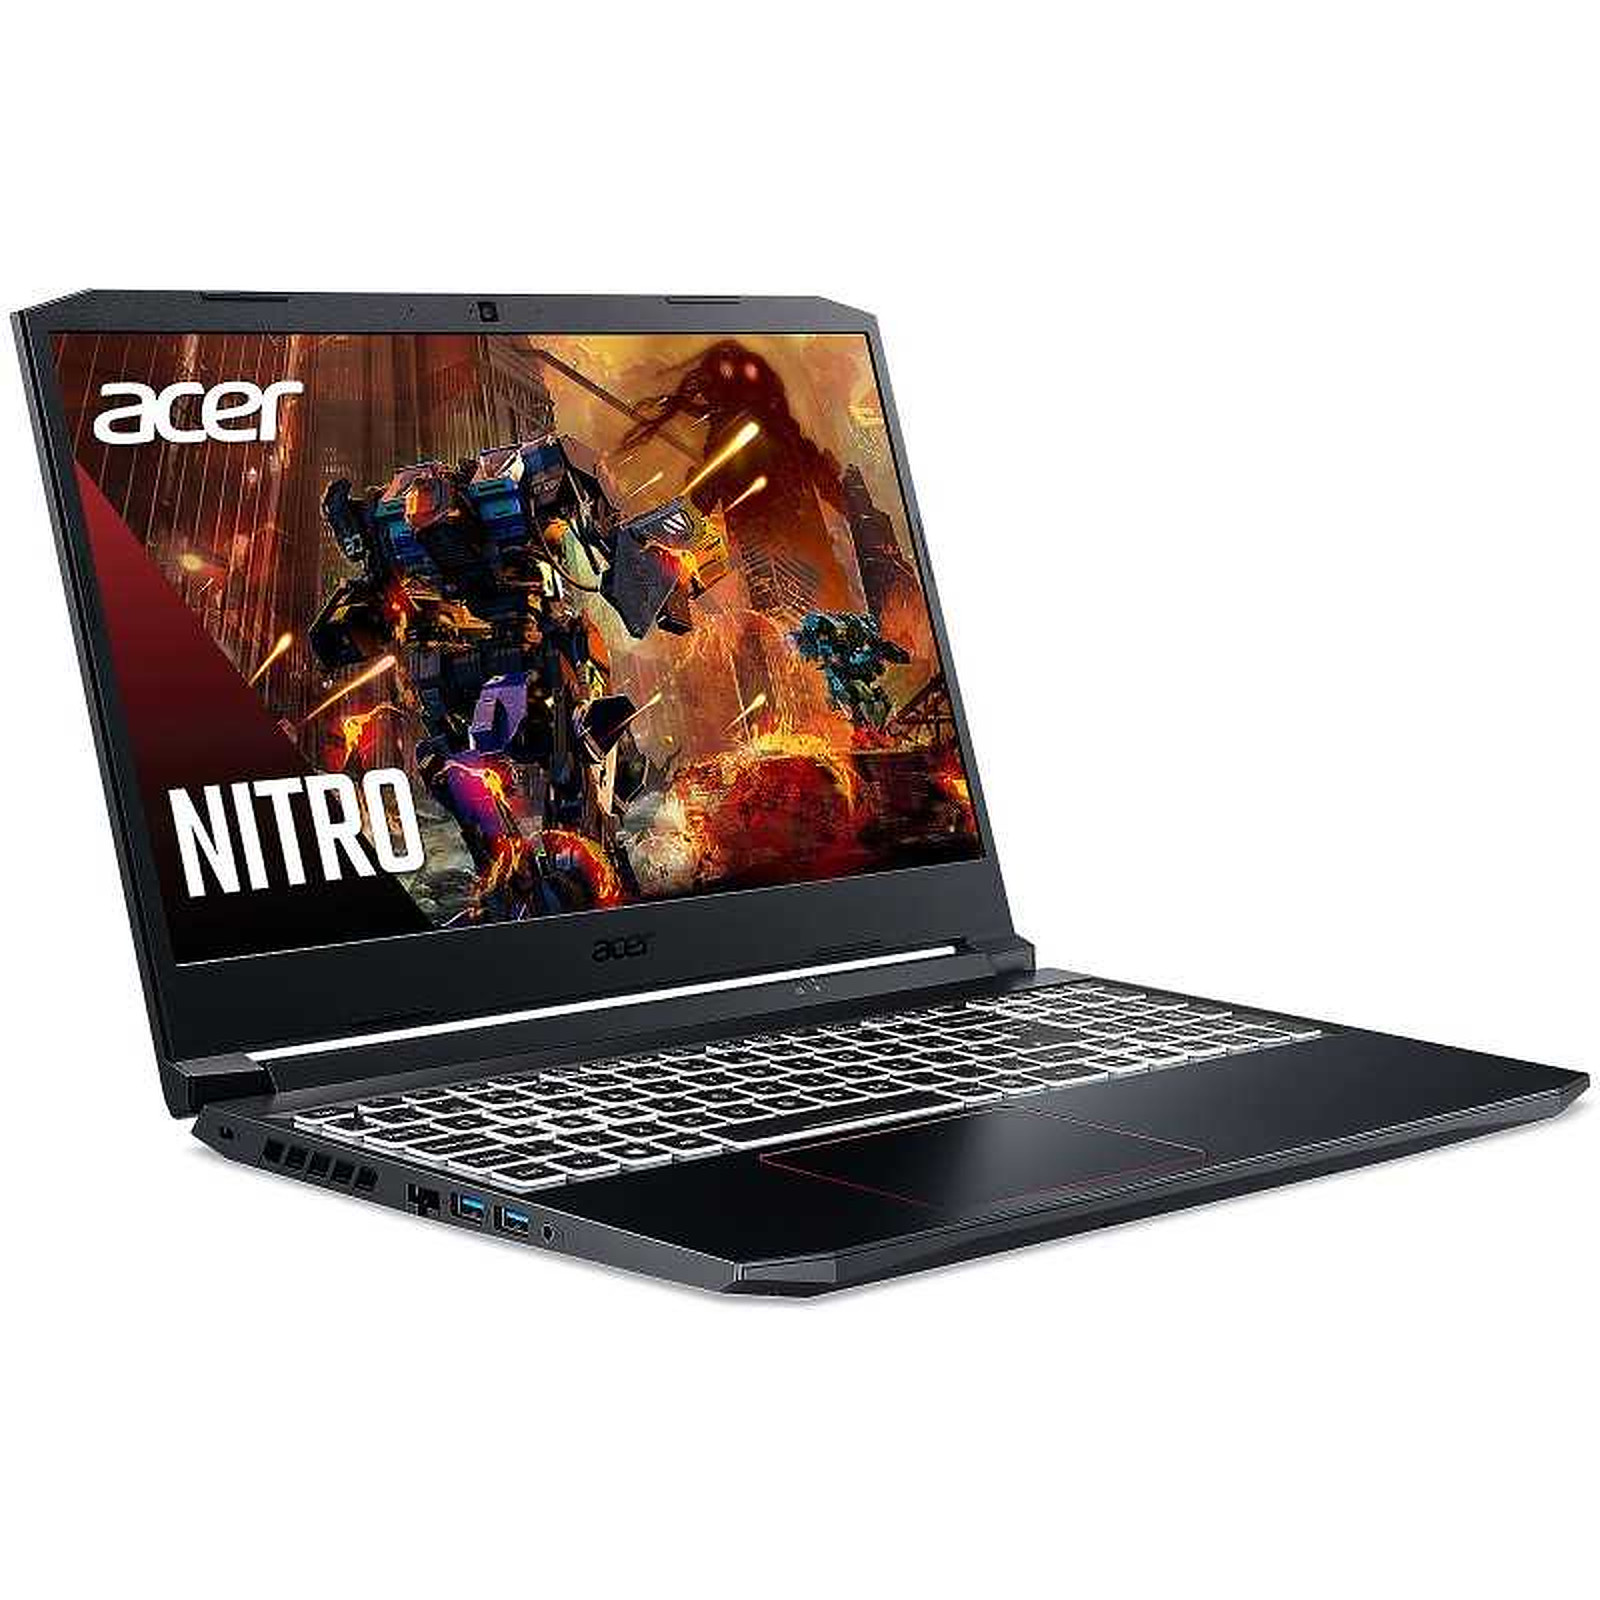 Acer Nitro 5 AN515-45-R029 (NH.QBSEF.009) · Reconditionne - PC portable reconditionne Acer